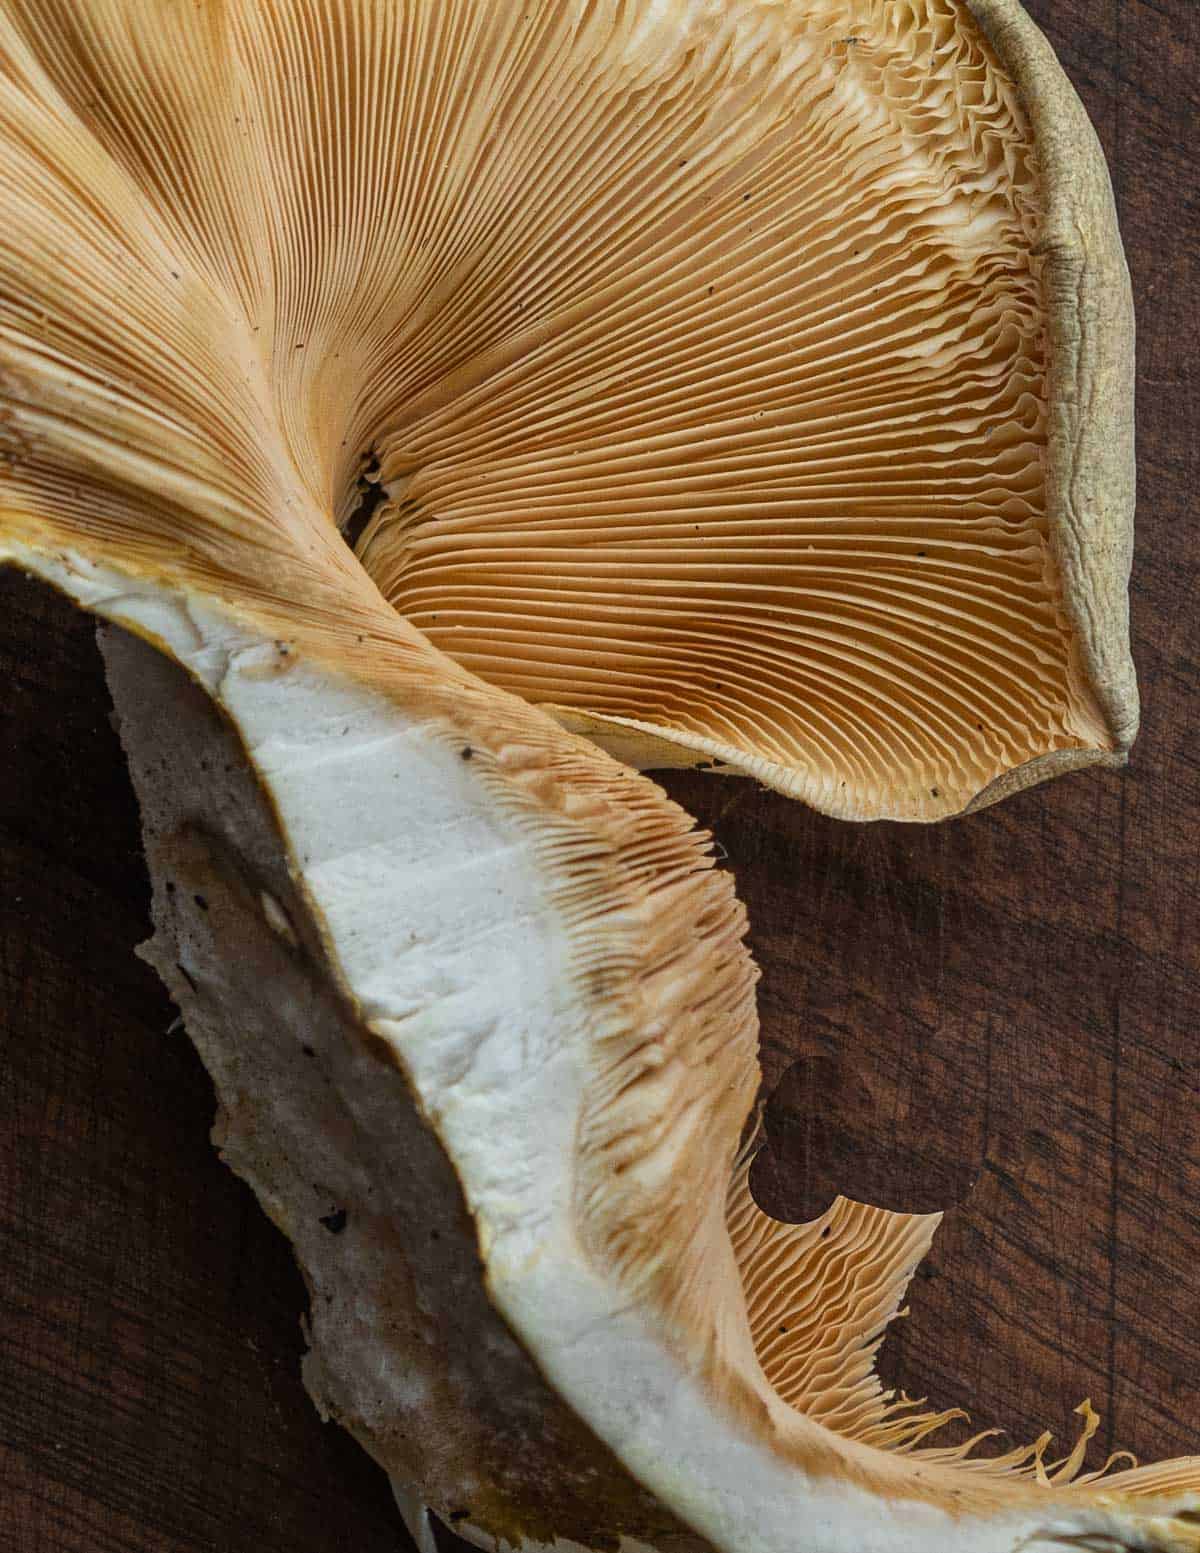 A close up image showing the cut white flesh of mukitake or late fall oyster mushrooms. 